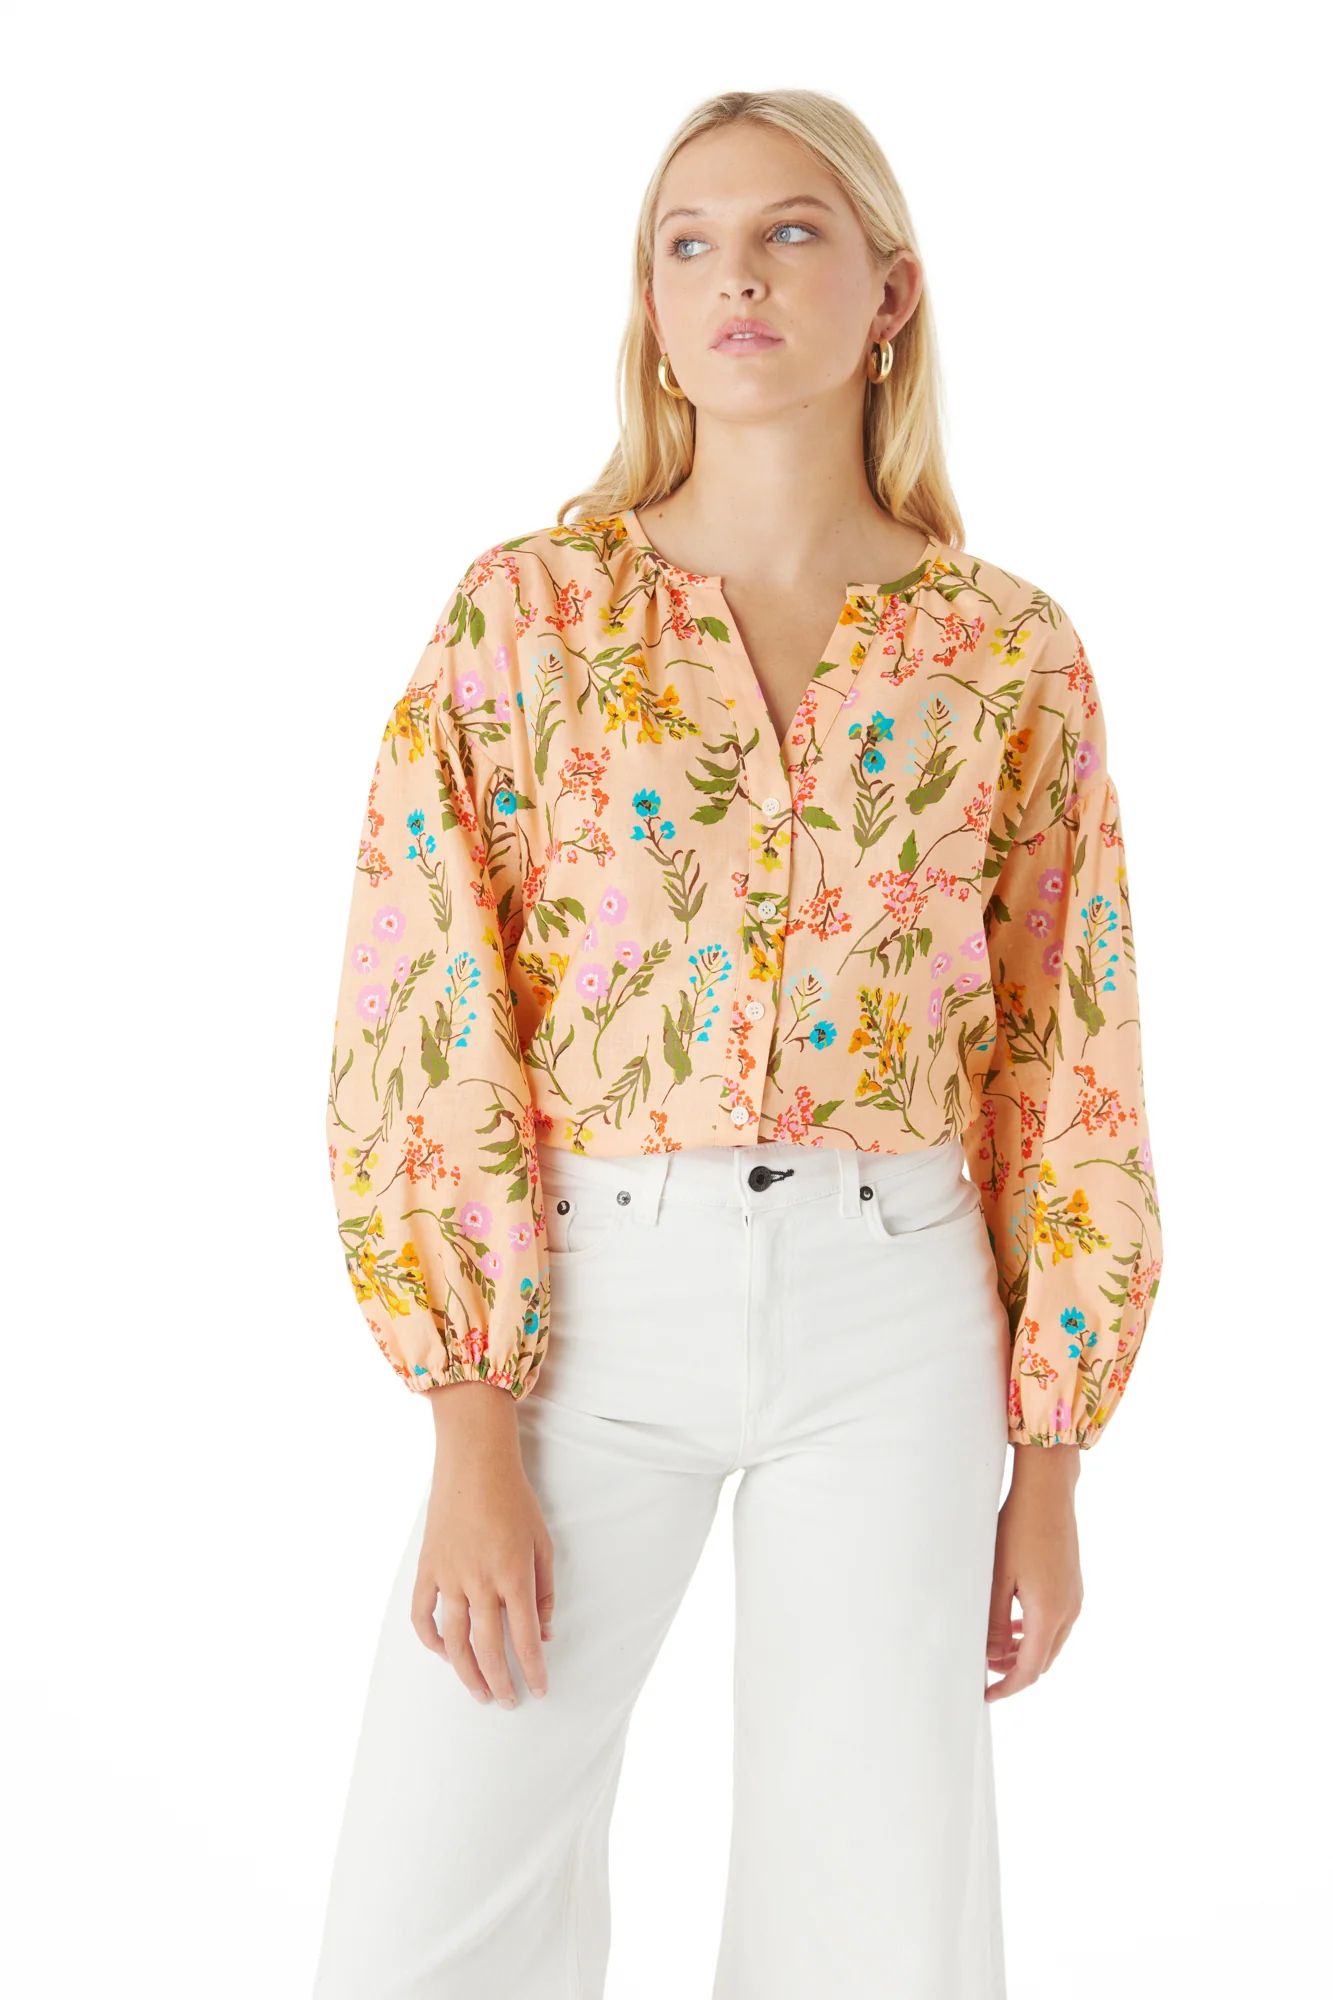 Romy Top in Horticulture | CROSBY by Mollie Burch | CROSBY by Mollie Burch